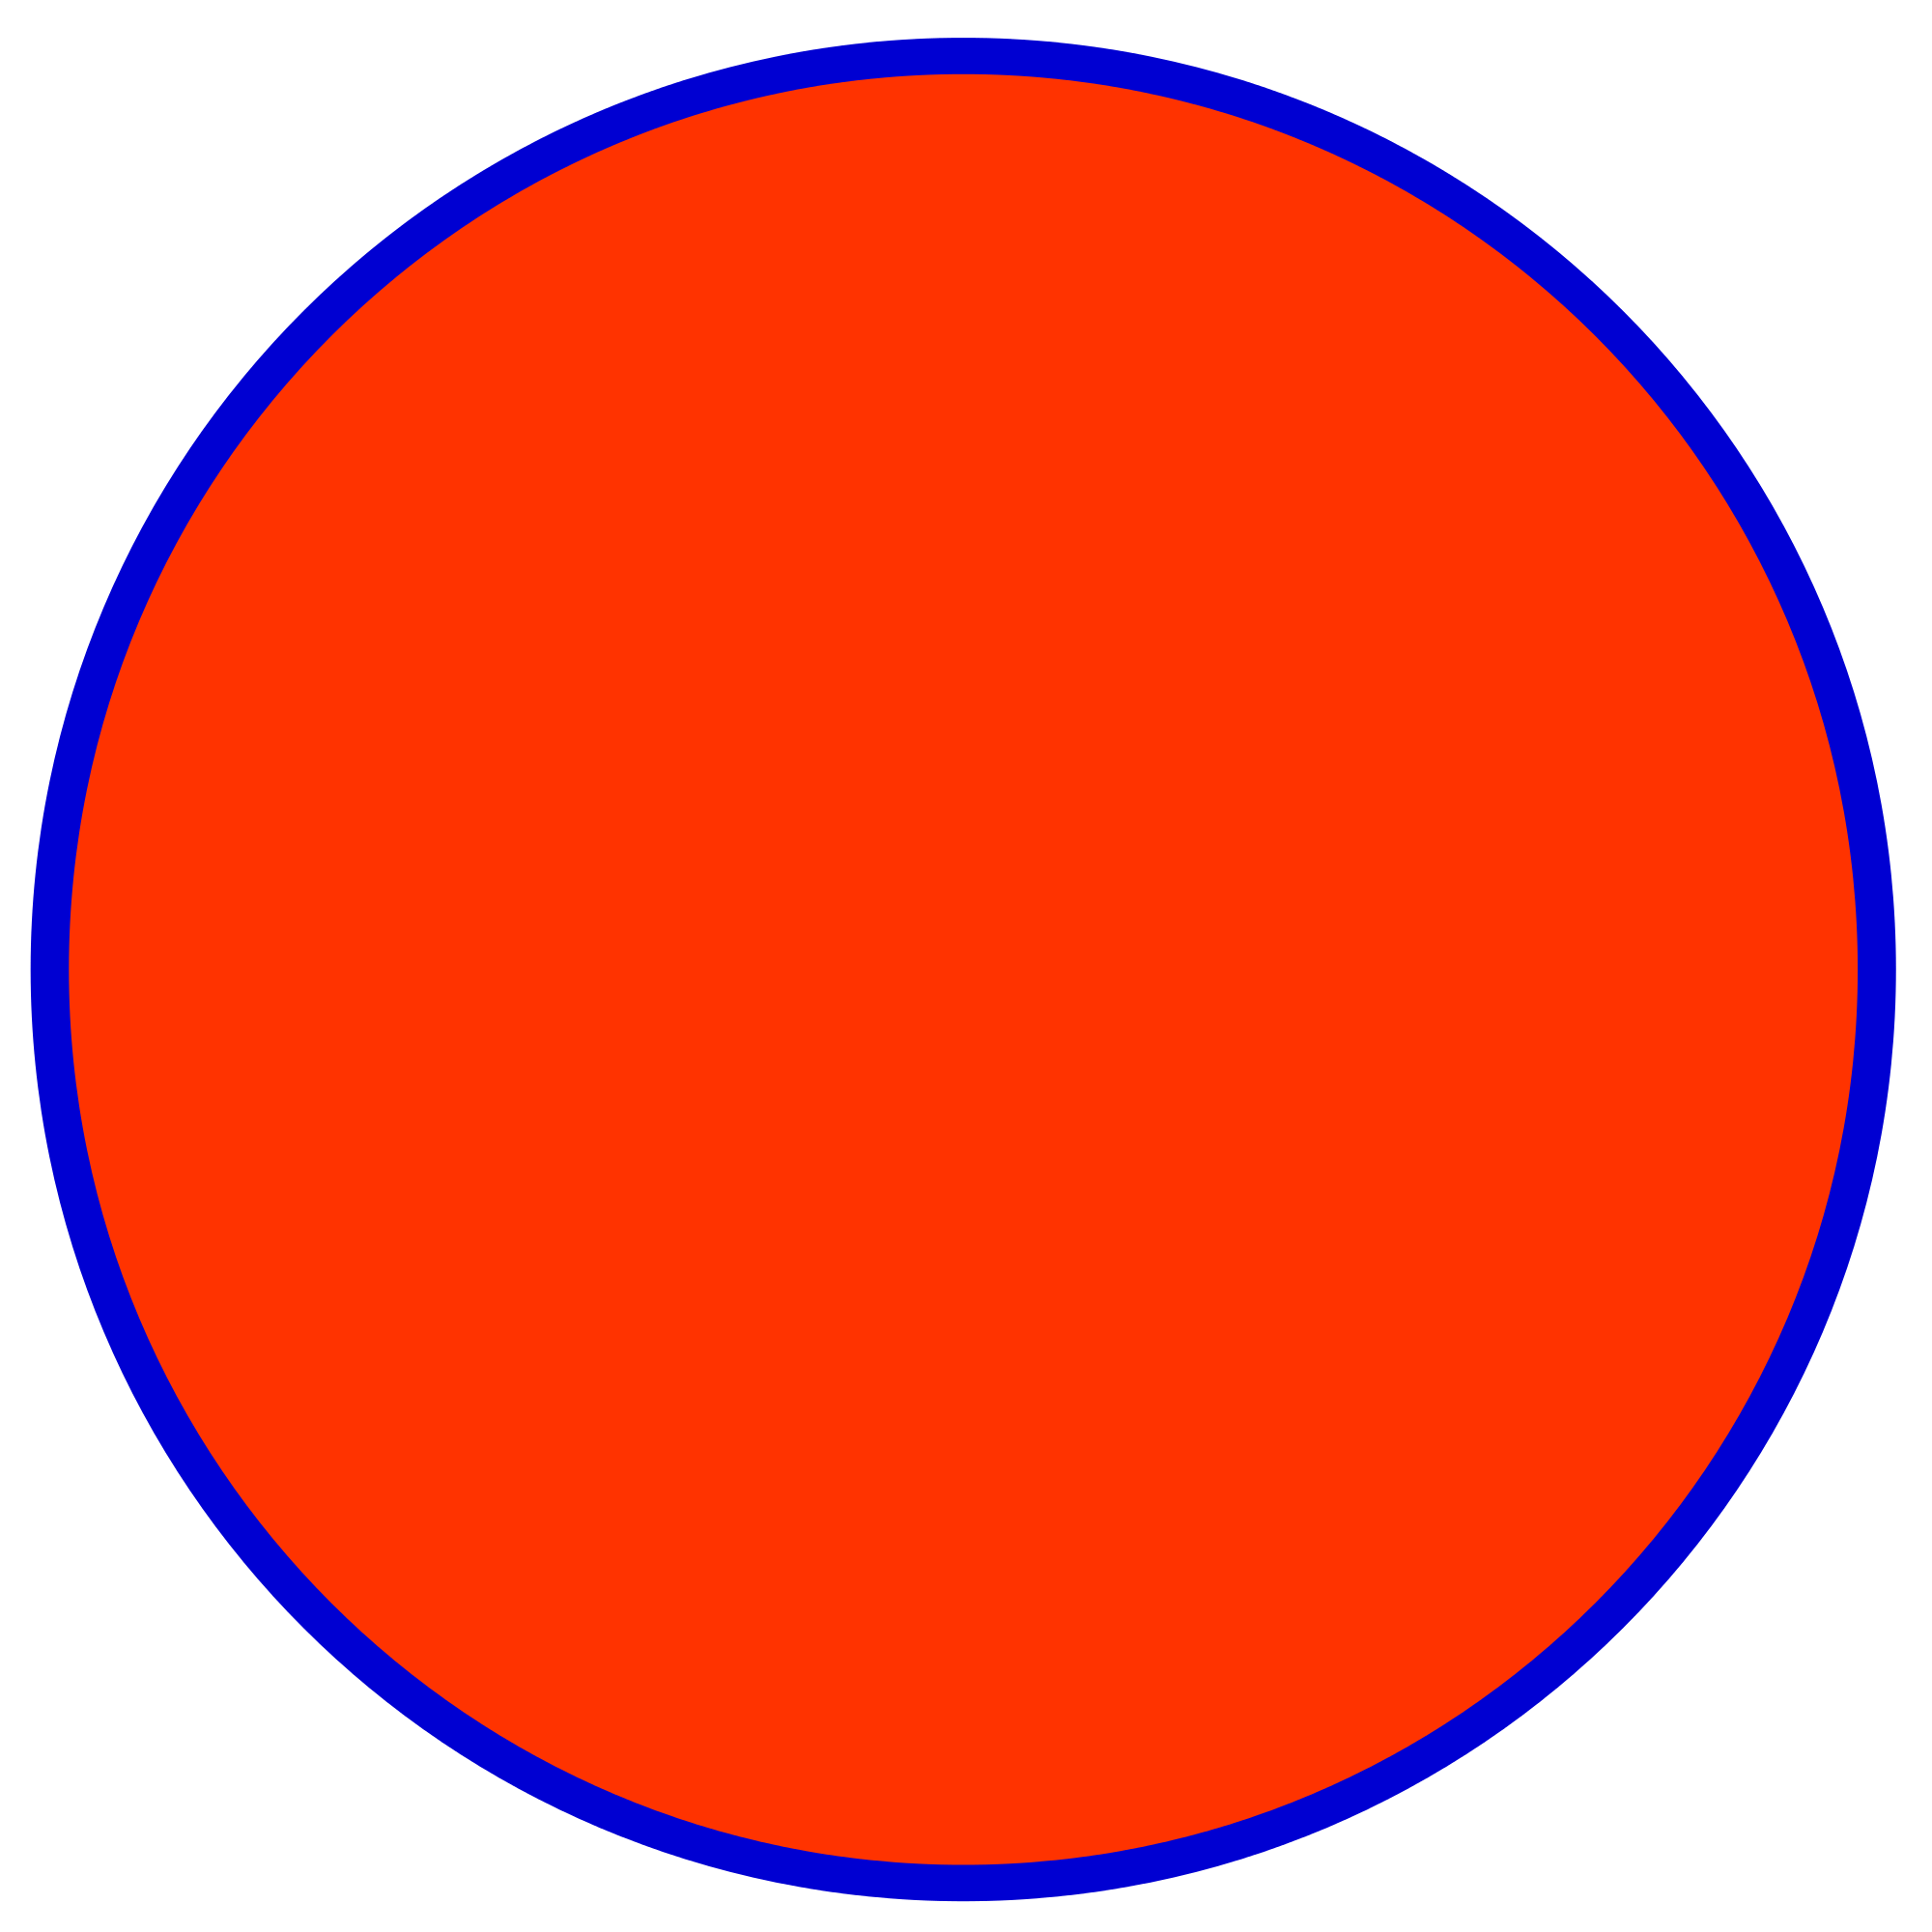 Red Blue and Orange Circle Logo - File:Red blue circle.svg - Wikimedia Commons